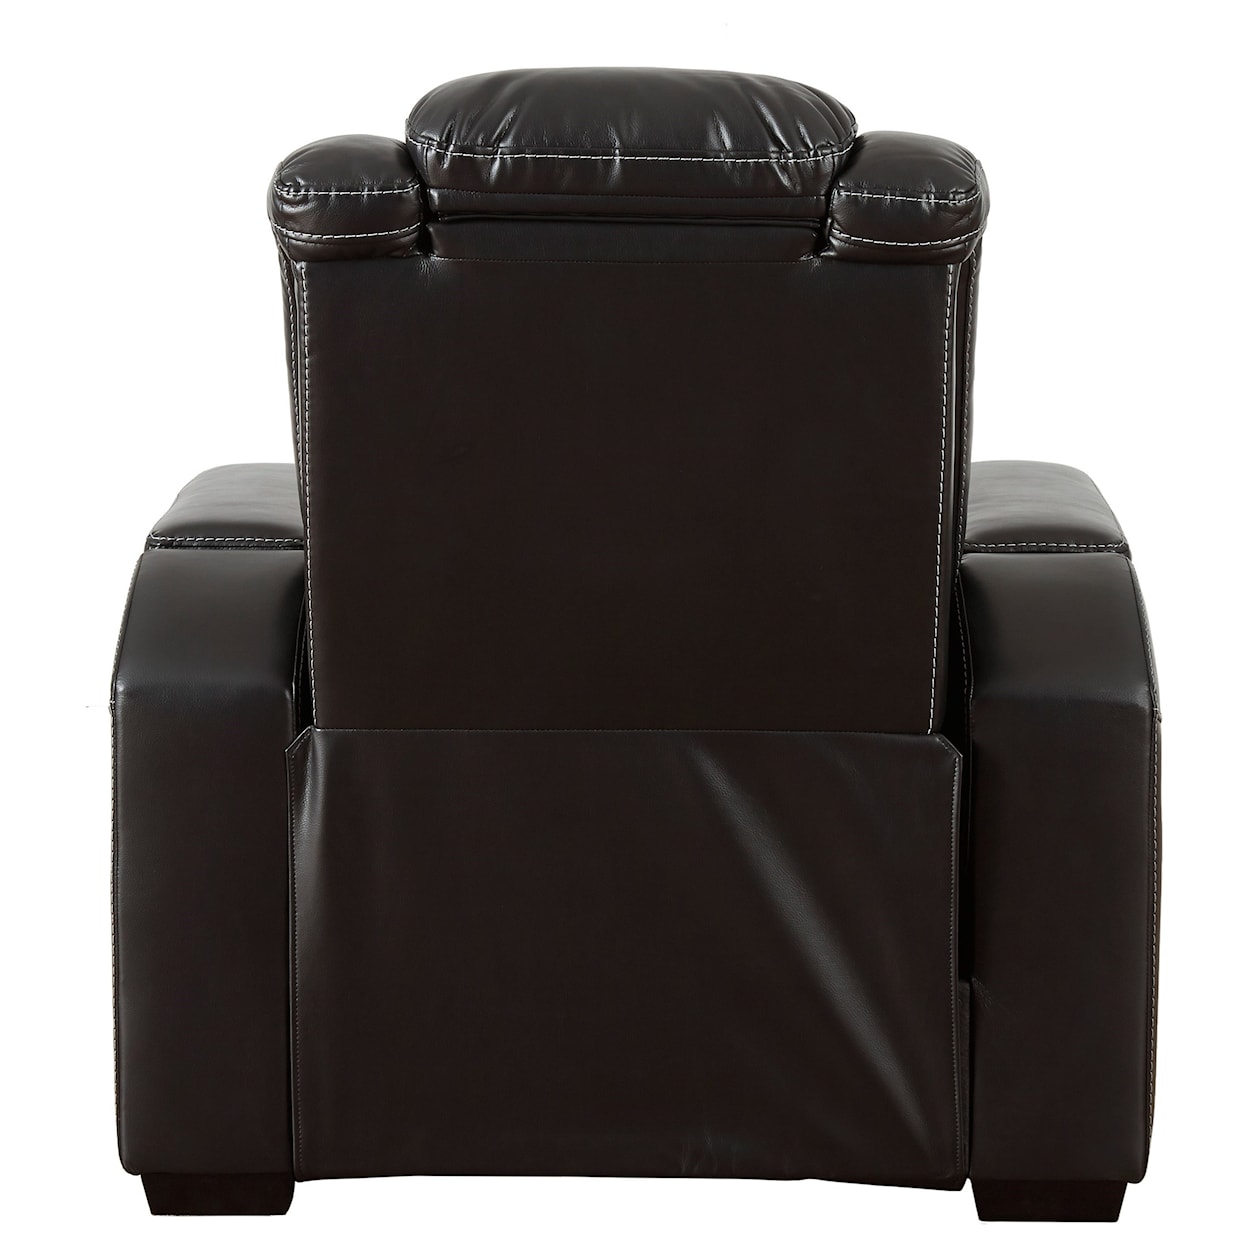 Signature Design by Ashley Party Time Power Recliner with Adjustable Headrest